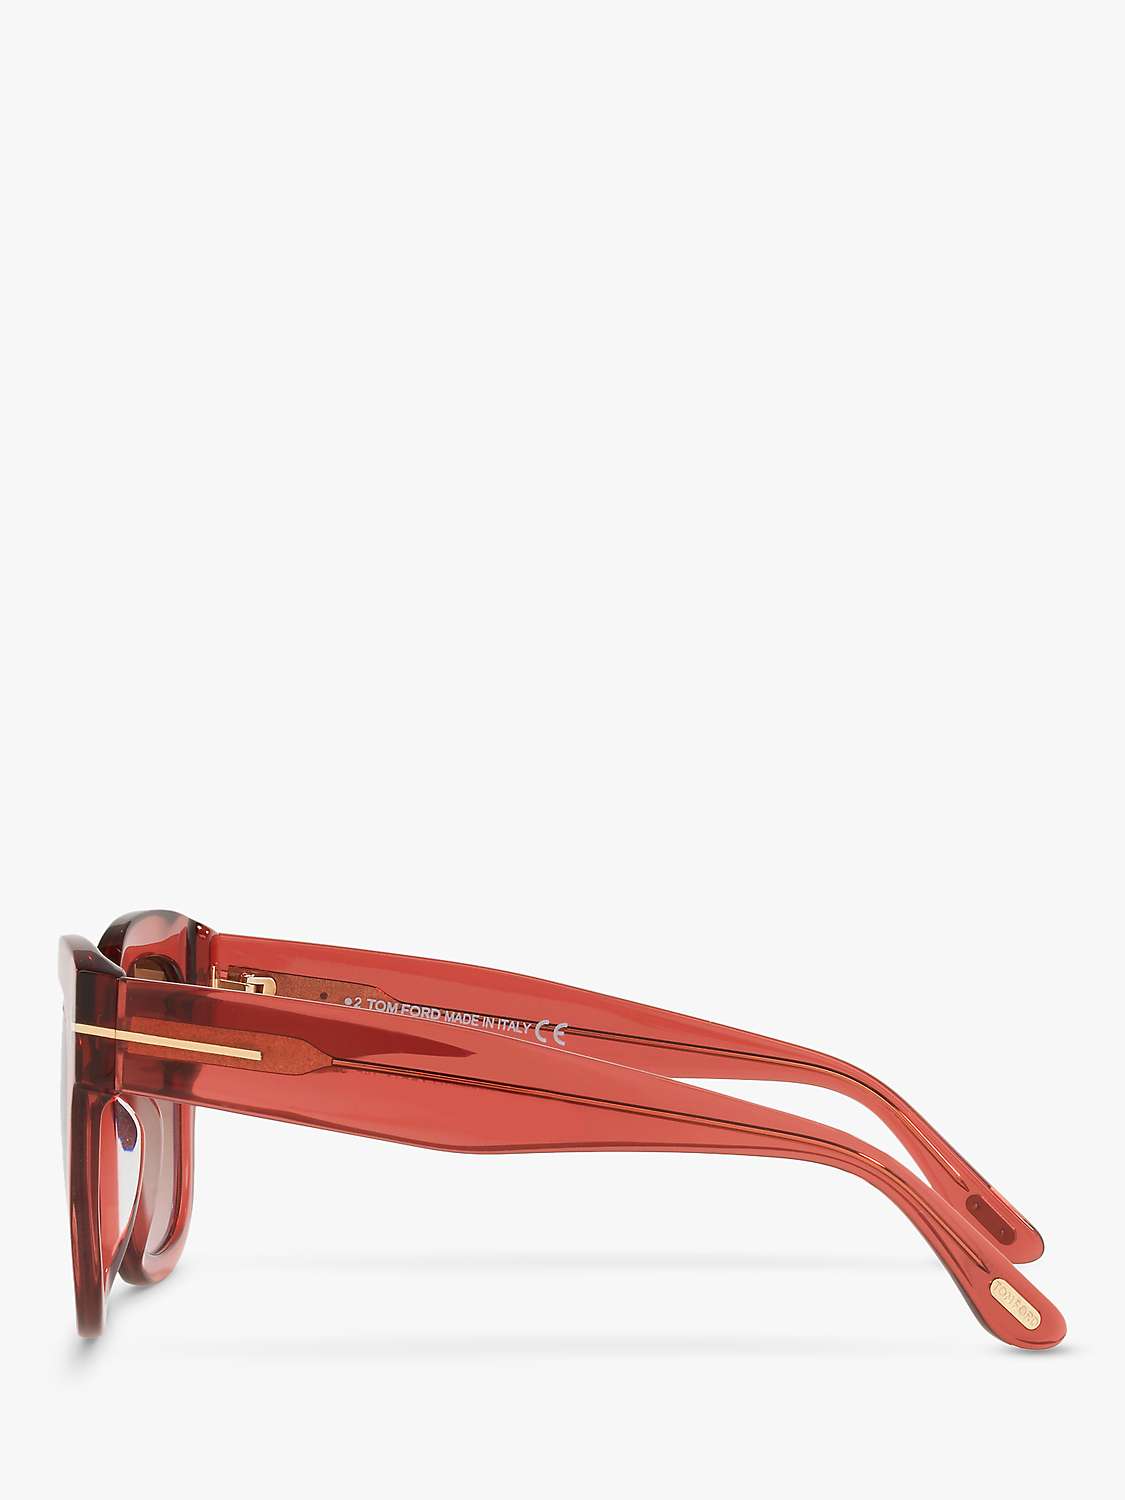 Buy TOM FORD 0TR001298 Women's Square Sunglasses, Pink Shiny Online at johnlewis.com